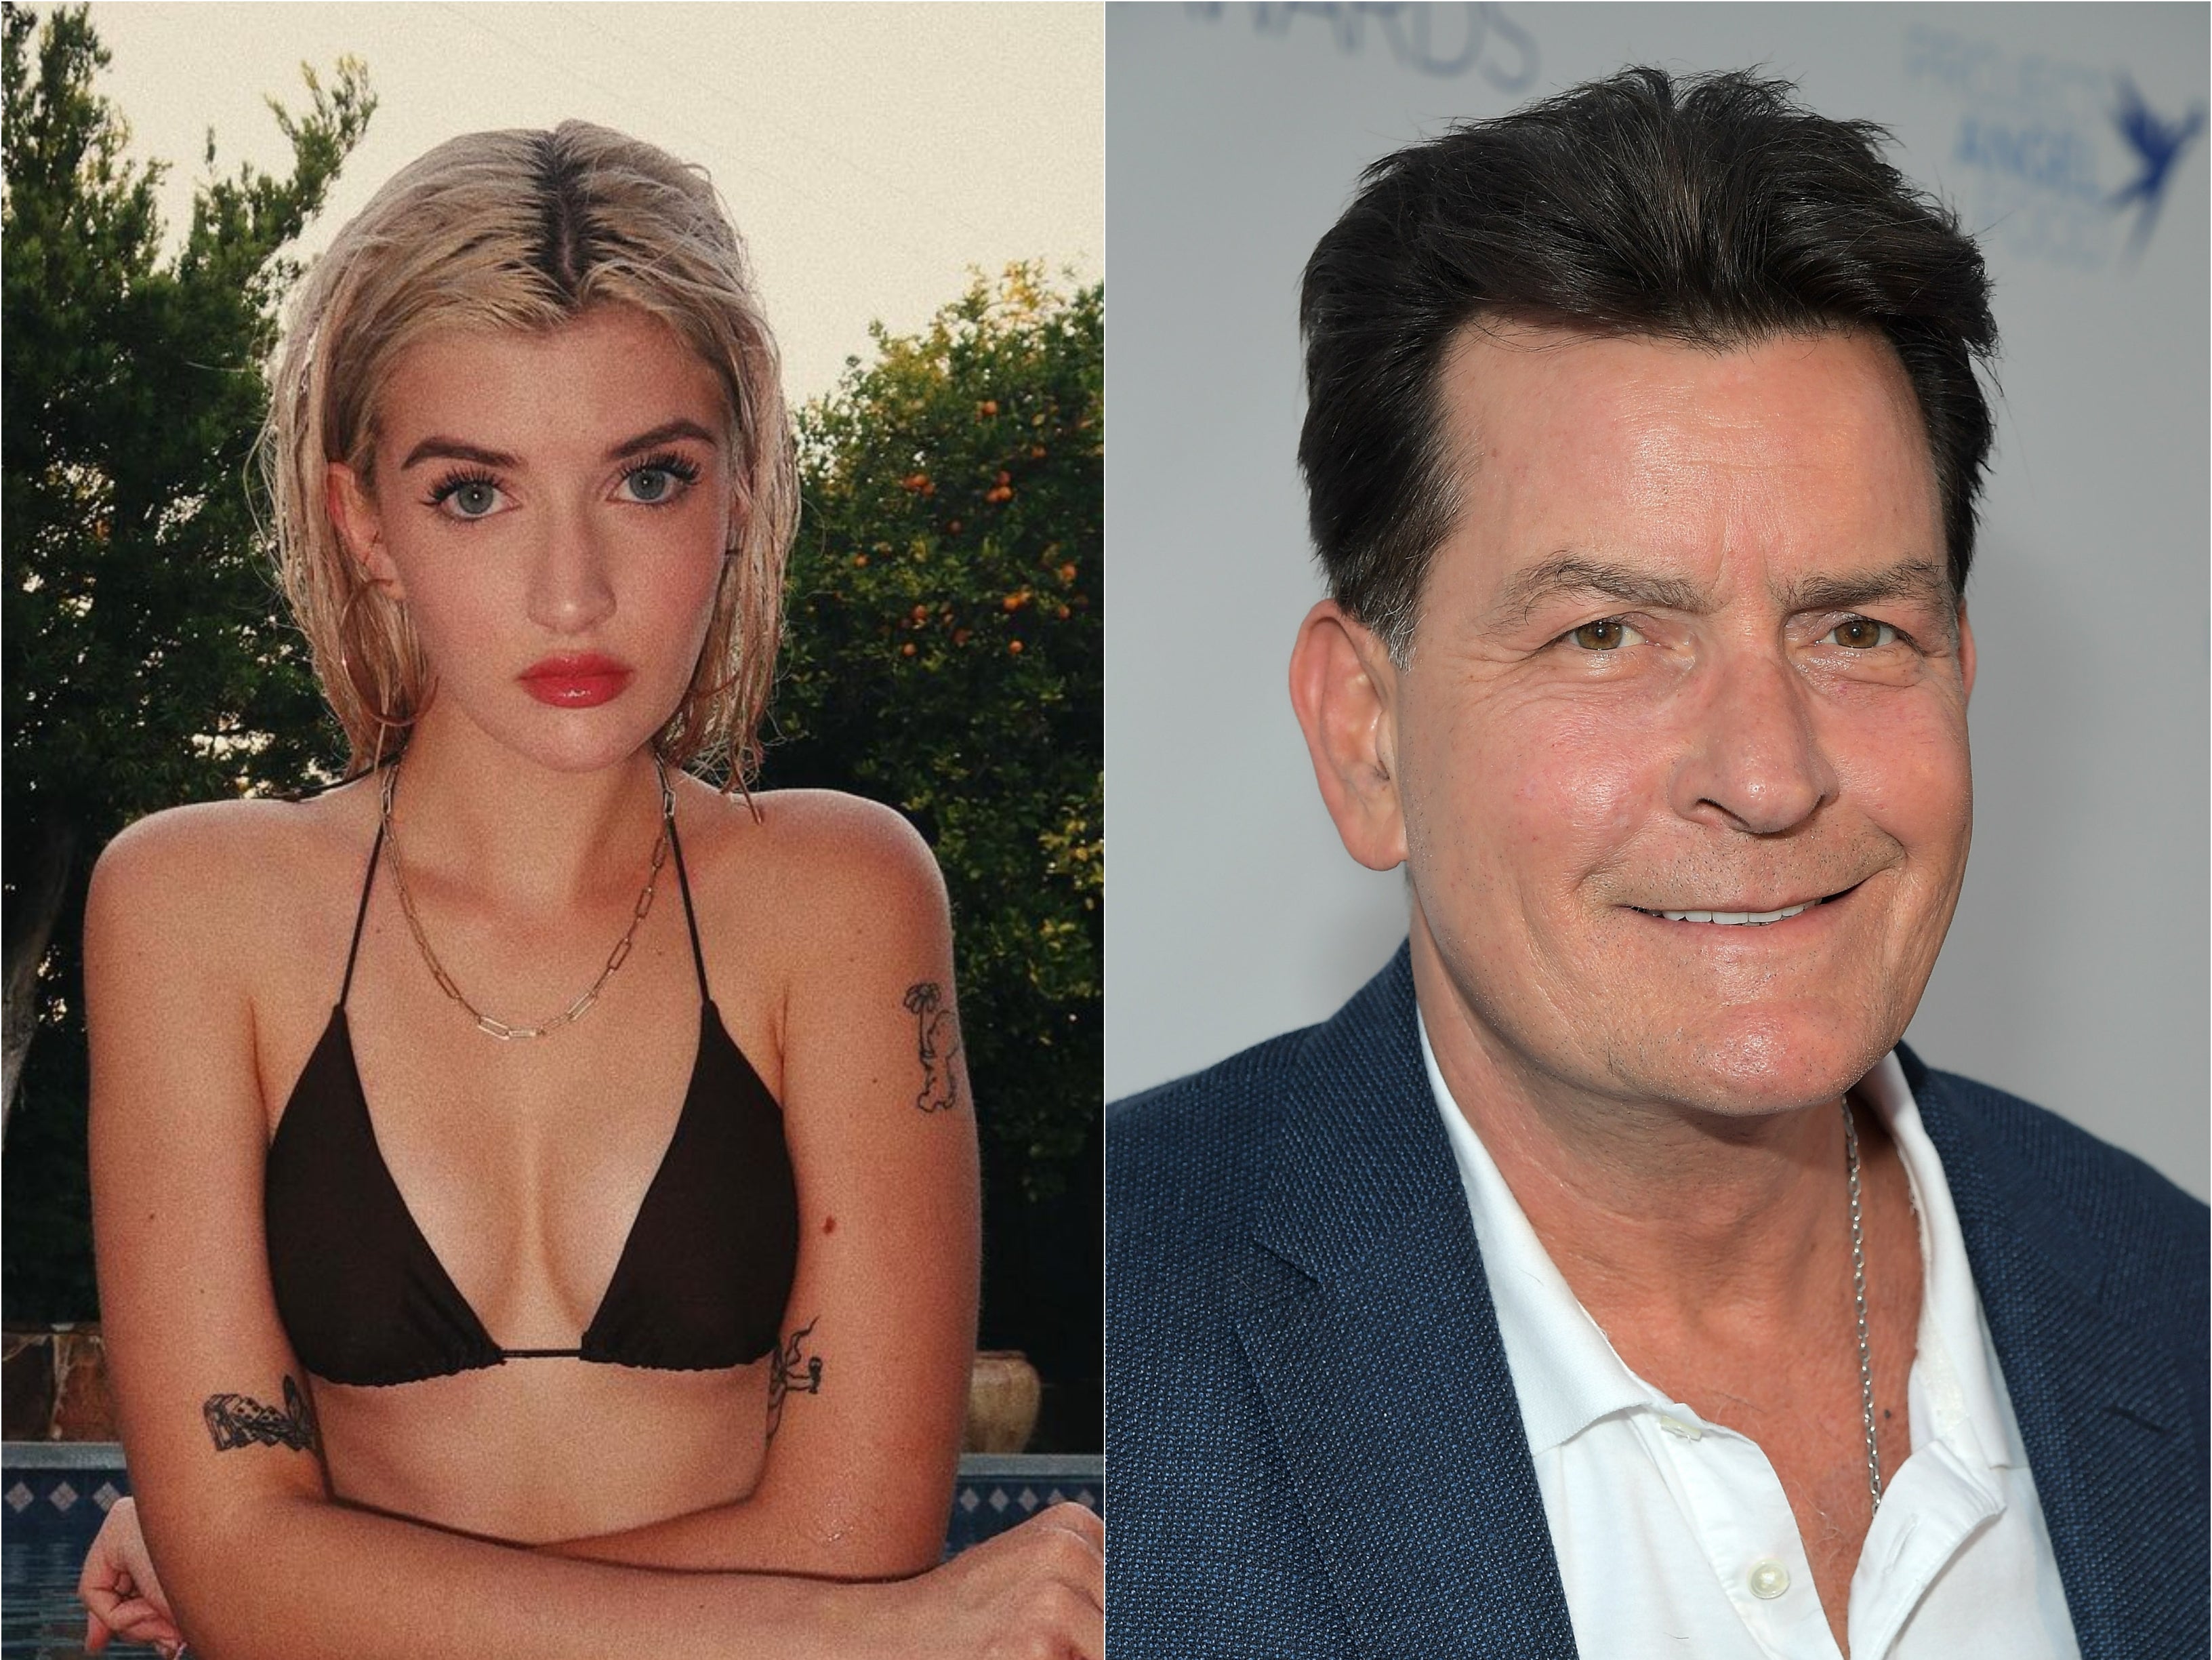 Sami Sheen is the daughter of Charlie Sheen and Denise Richards